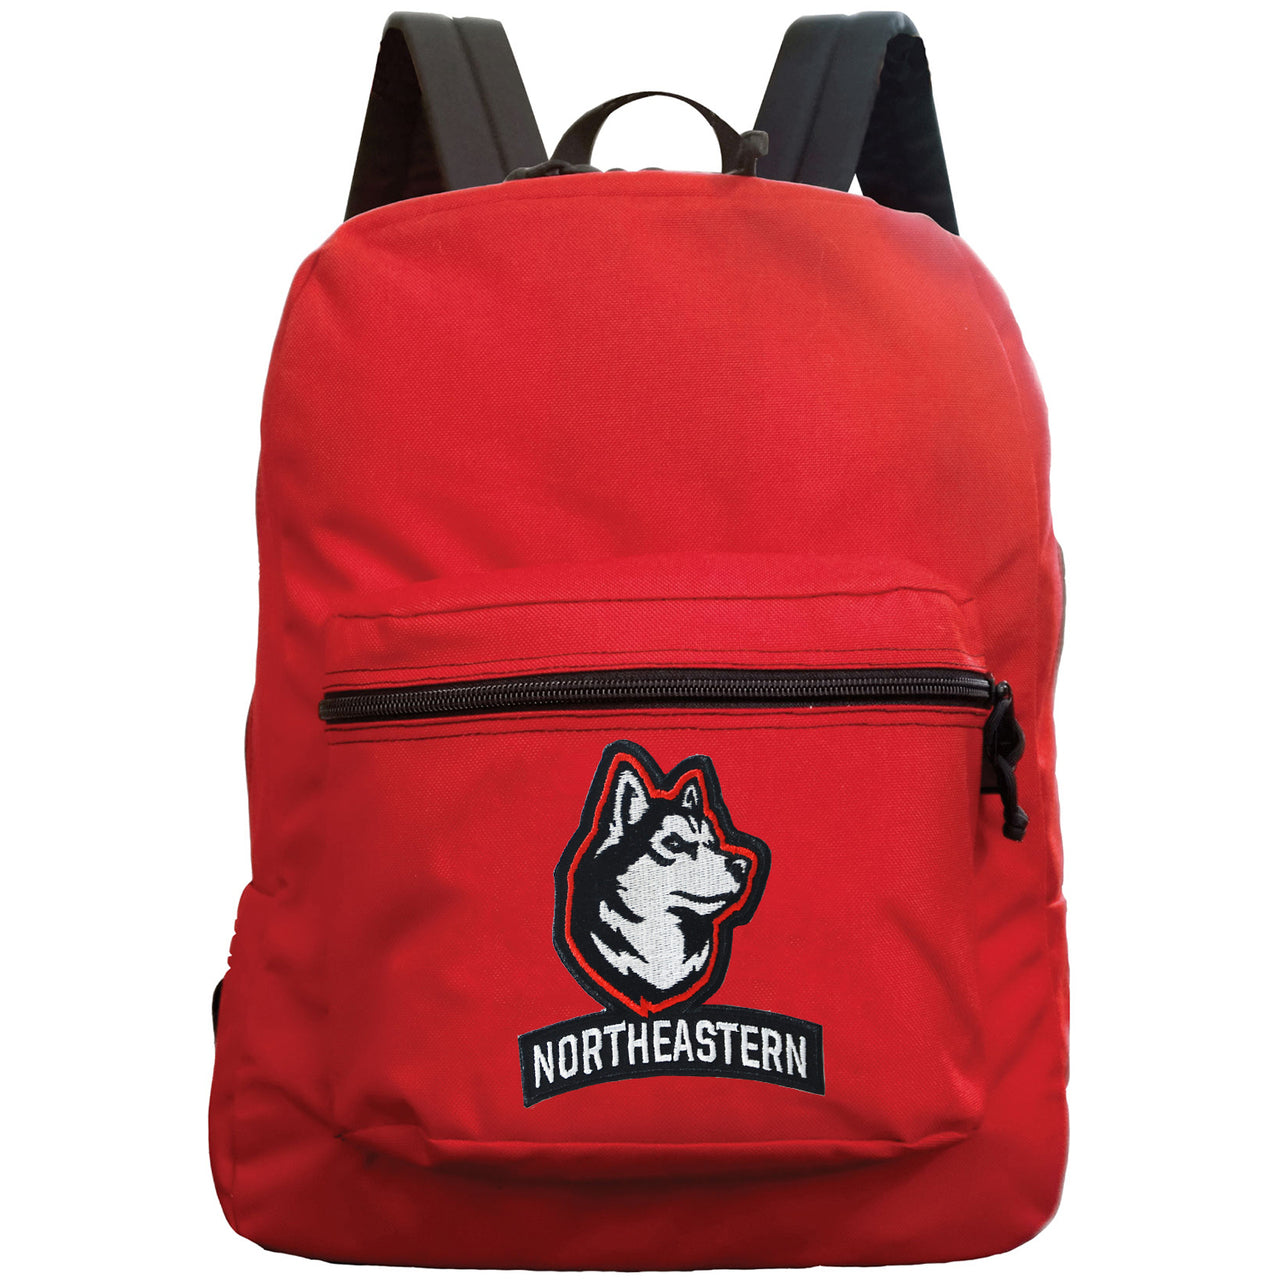 Northeastern Huskies Made in the USA premium Backpack in Red